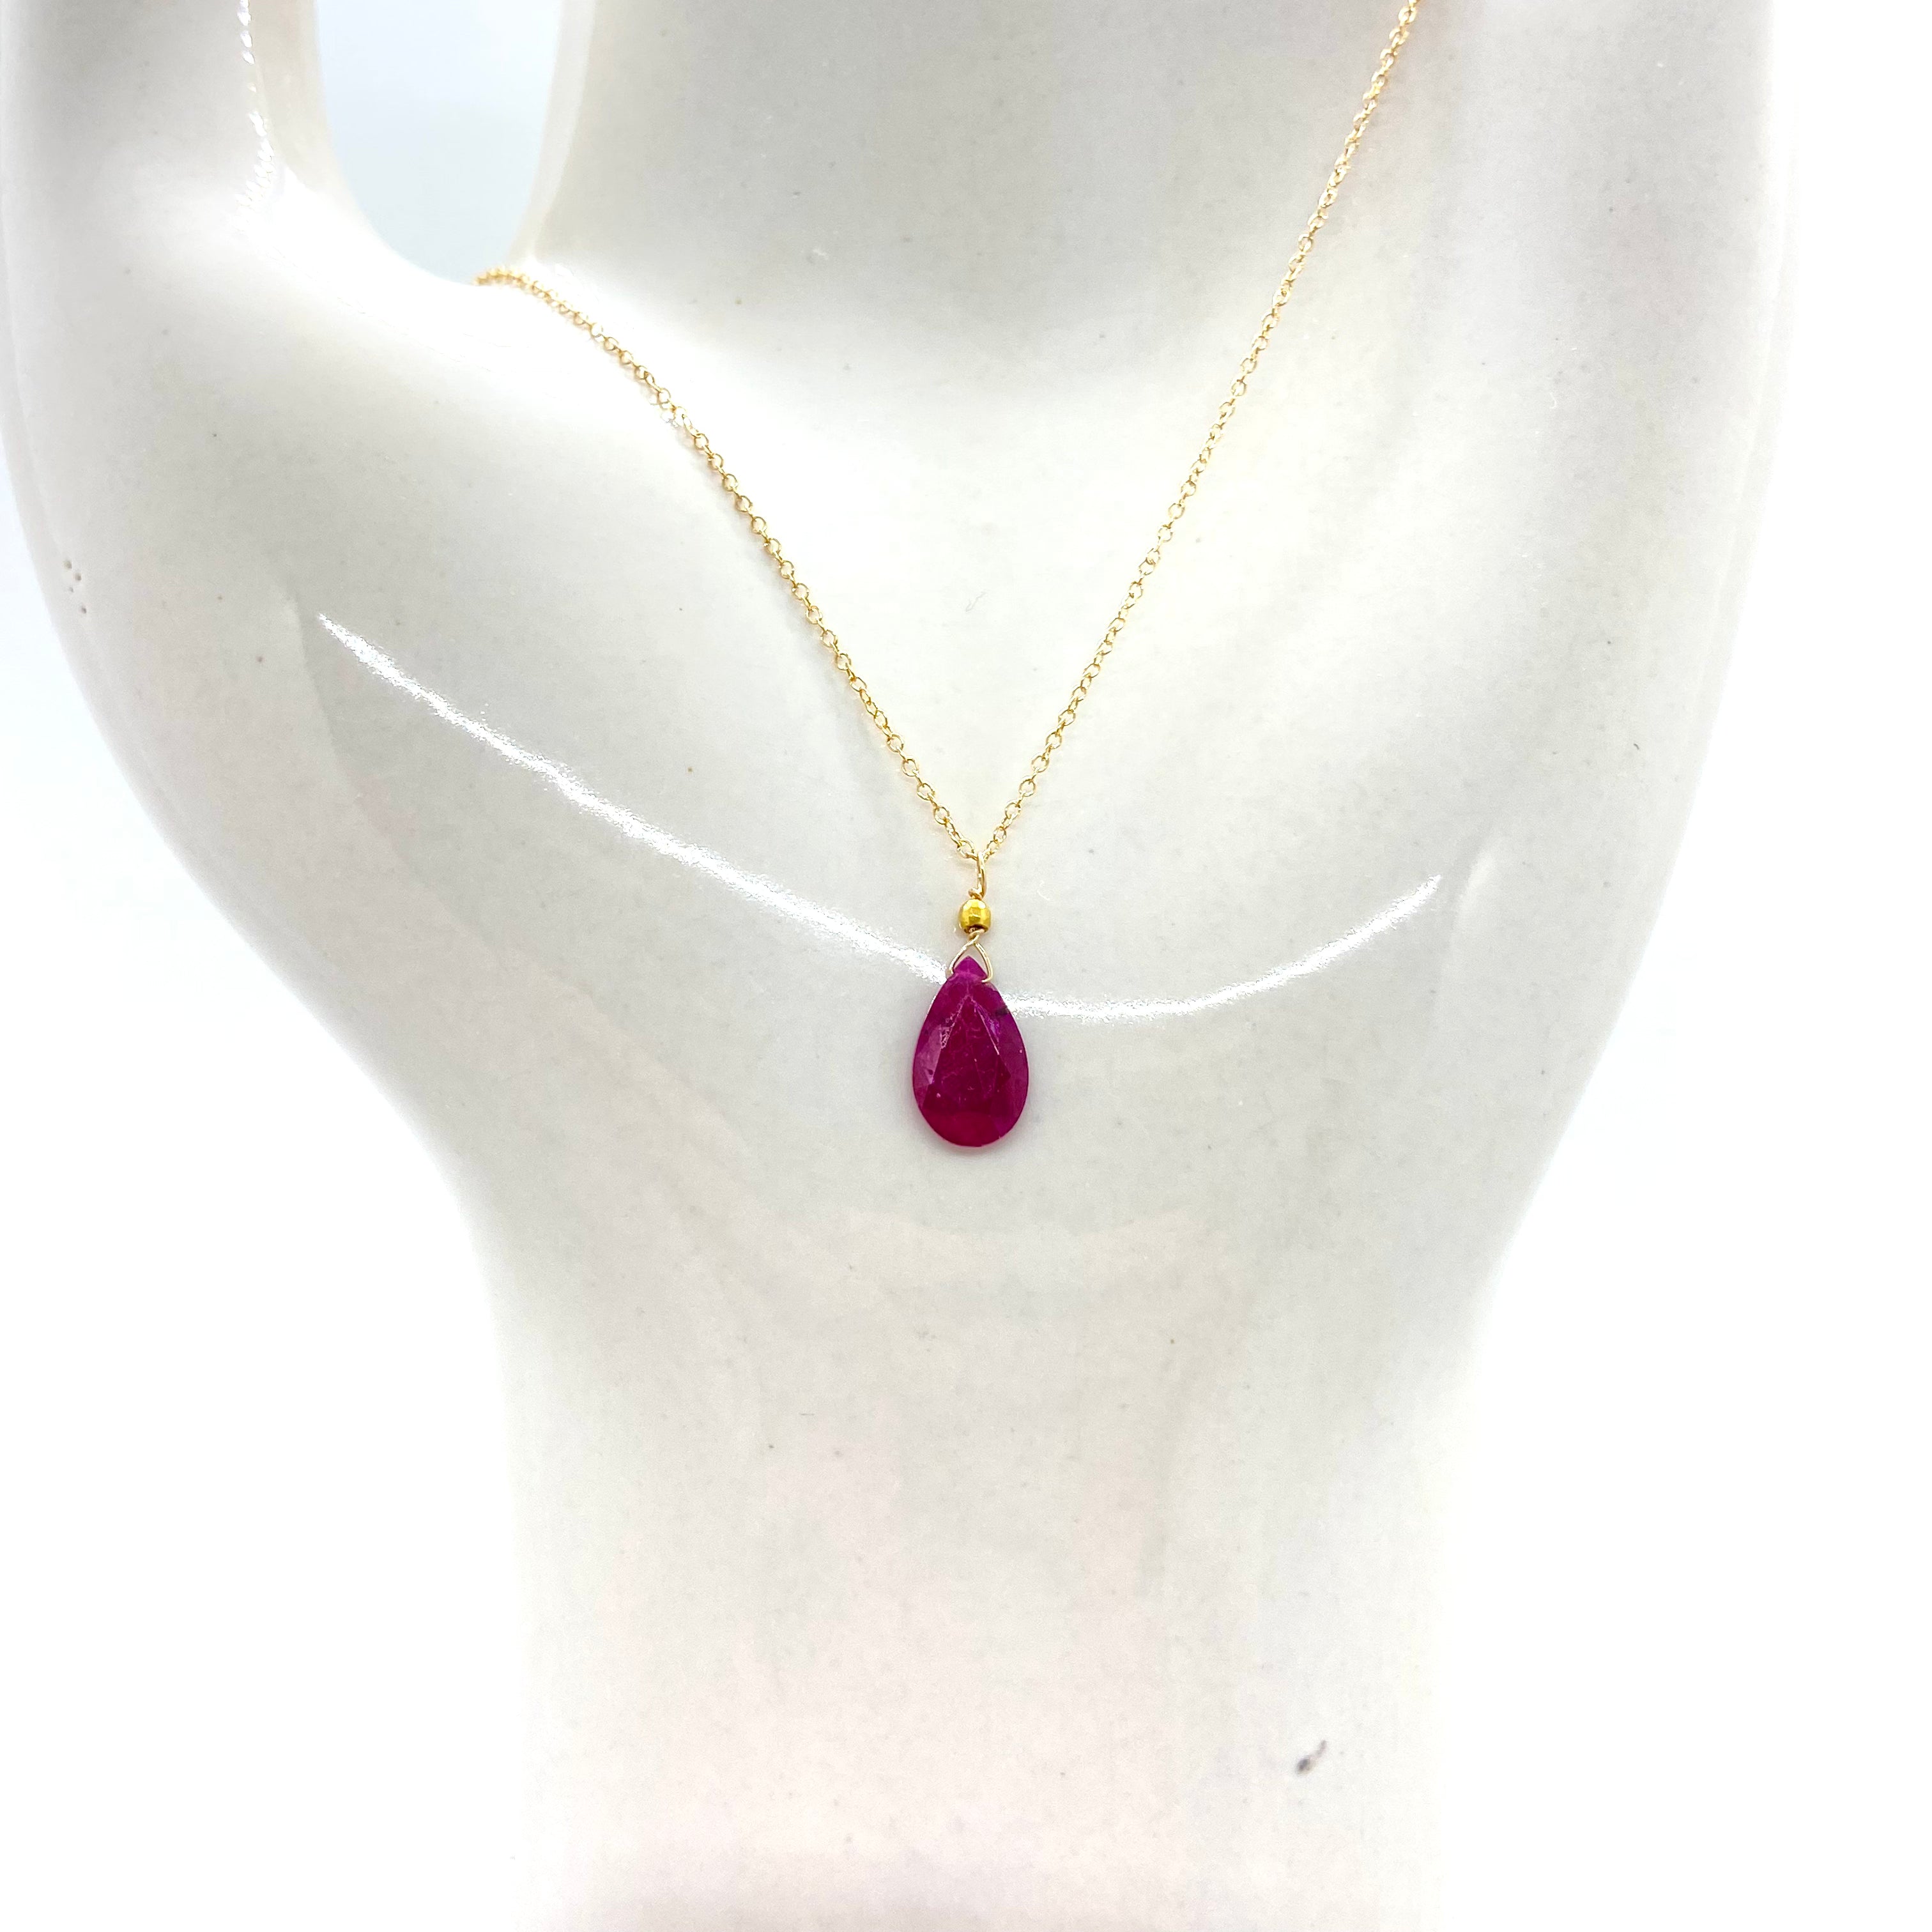 14k Gold Chain Necklace w/ Ruby & 18k Gold Nugget